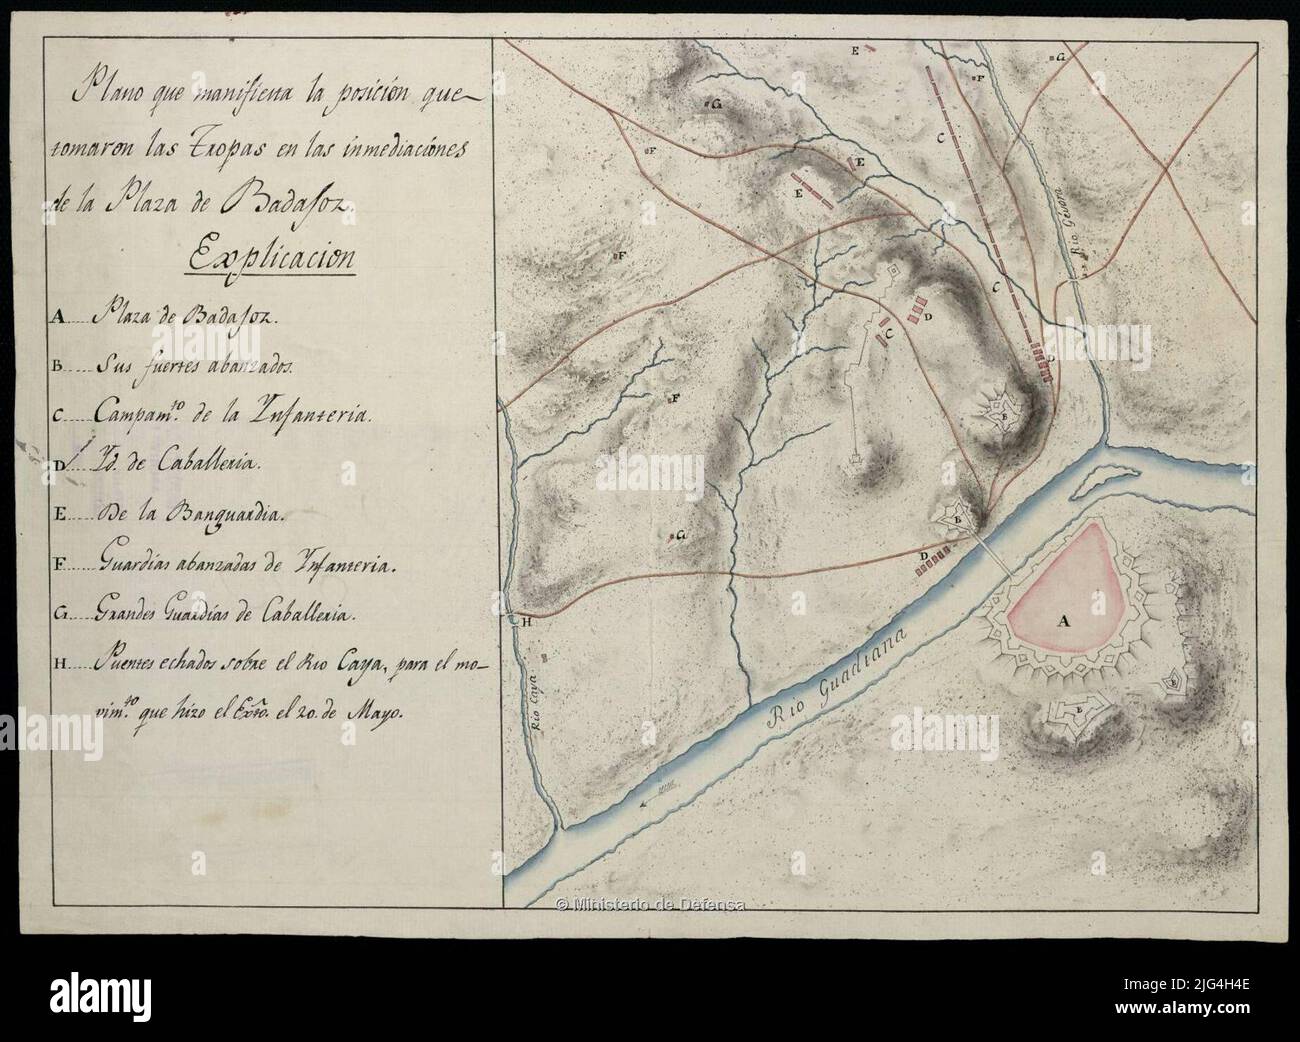 Plan that manifests the position that troops took in the immediate vicinity of Badajoz Square. Manuscript to Plumilla in black ink and colored to the watercolor in various colors relief represented by shadow relationship of the main fortifications, camps, bridges etc, indicated by alphabetical key indicates the course of the Guadiana River with arrow Stock Photo